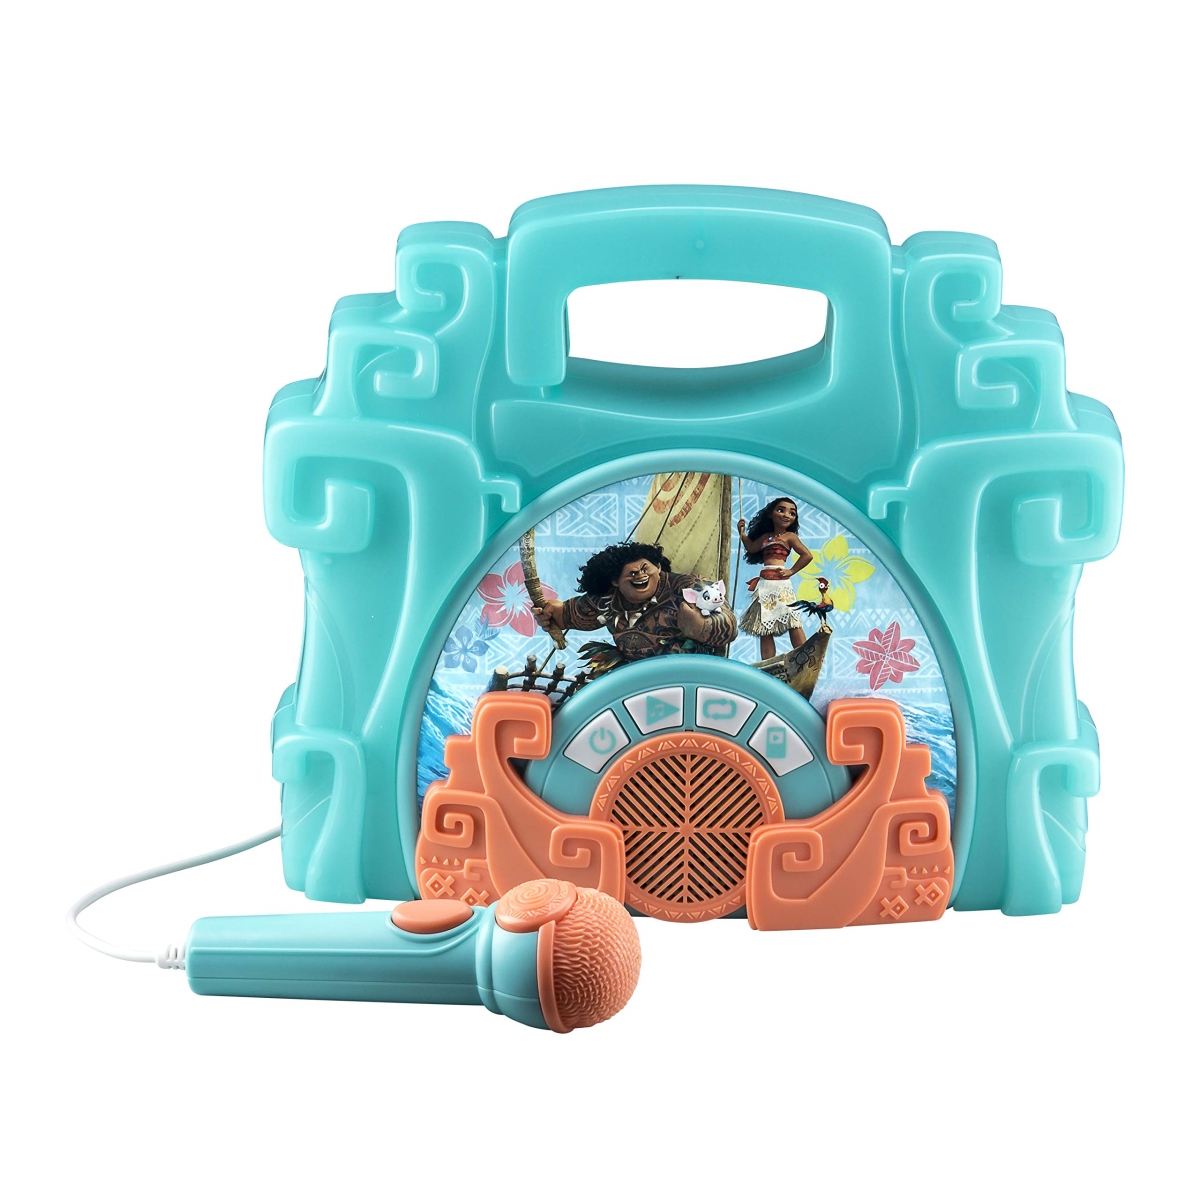 KIDSDESIGN ekids sing along boom box speaker with microphone for fans of moana toys, kids karaoke machine with built in music and flashi